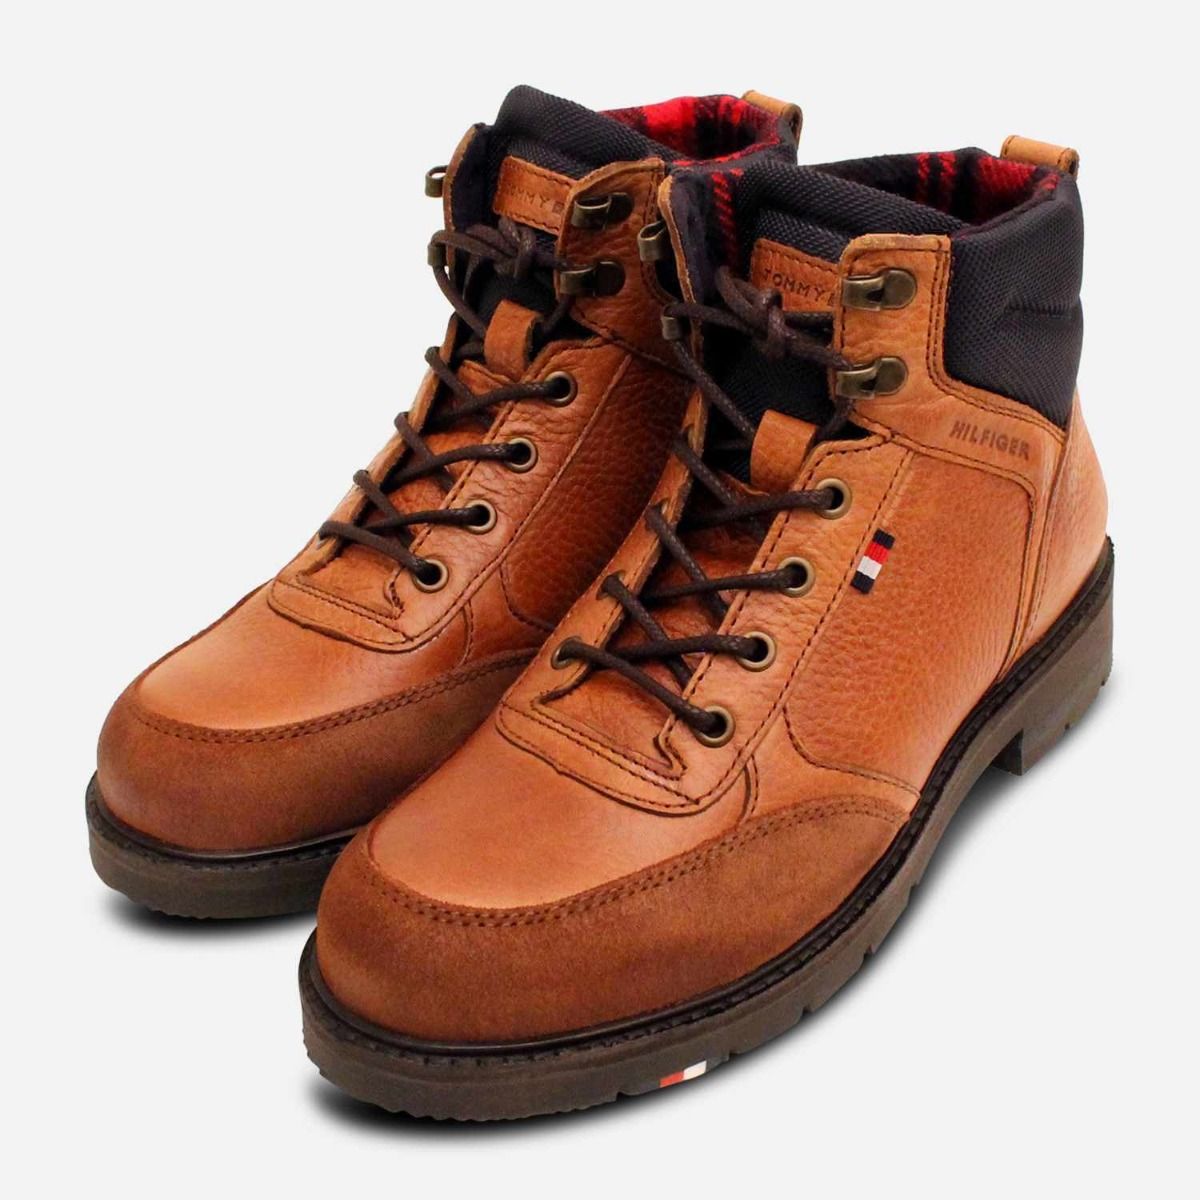 Premium Tommy Hilfiger Mens Boots in Brown Leather